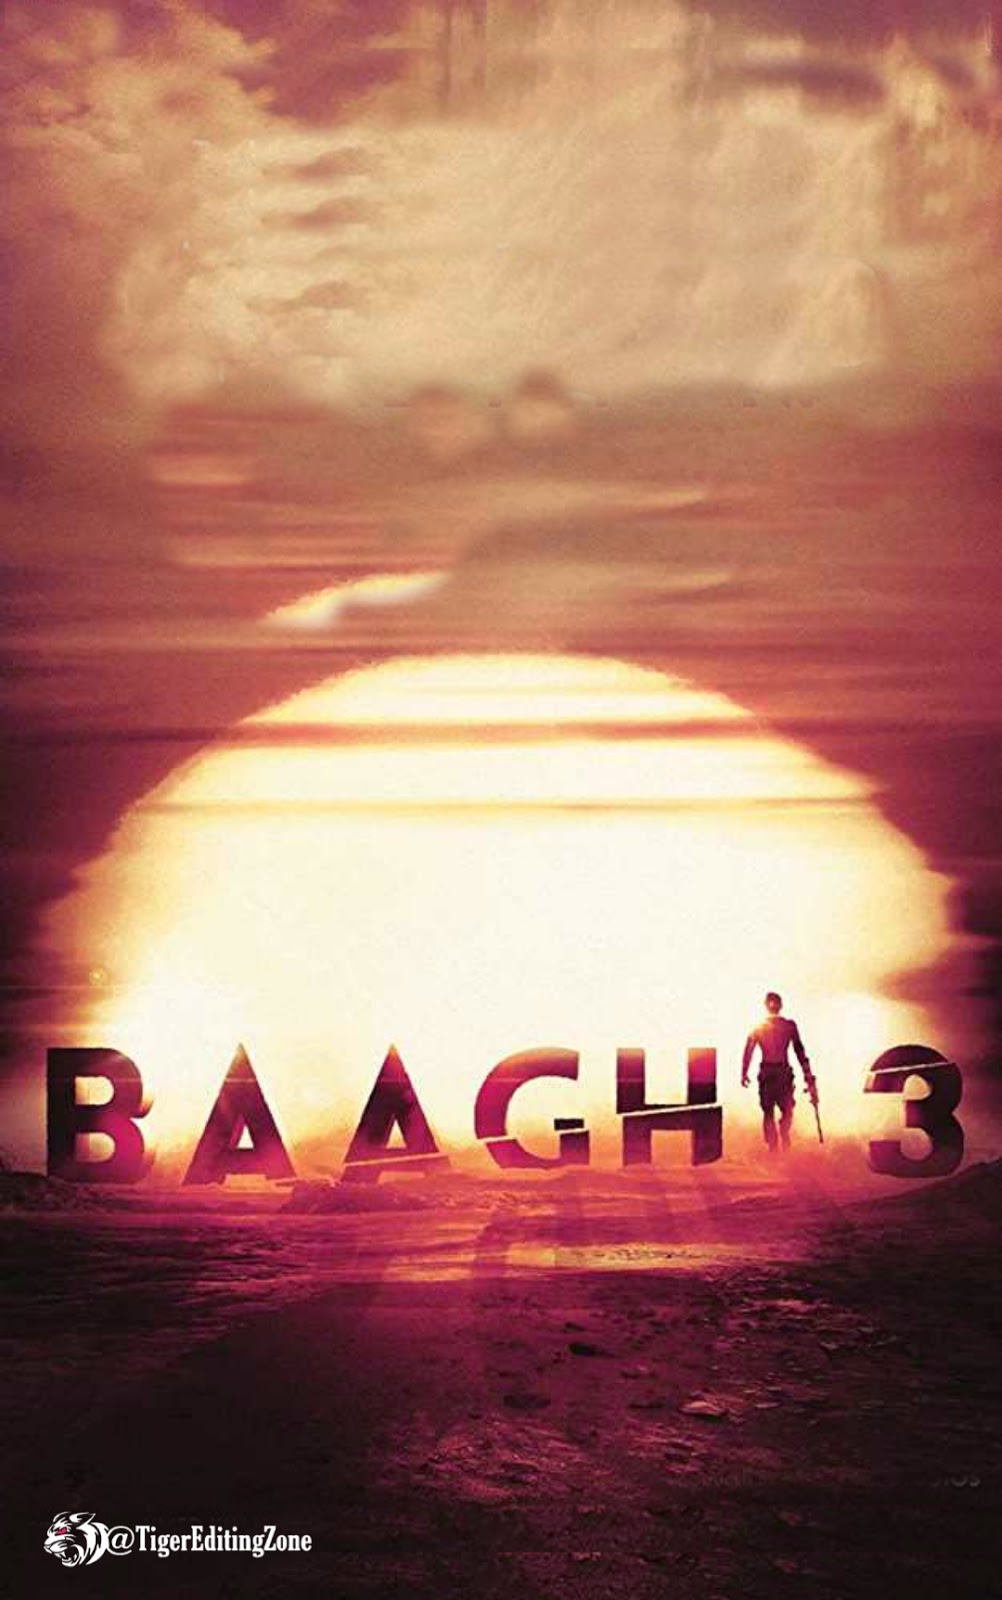 Baaghi 3 Photo Editing Background | Baaghi 3 Movie Poster for Editing